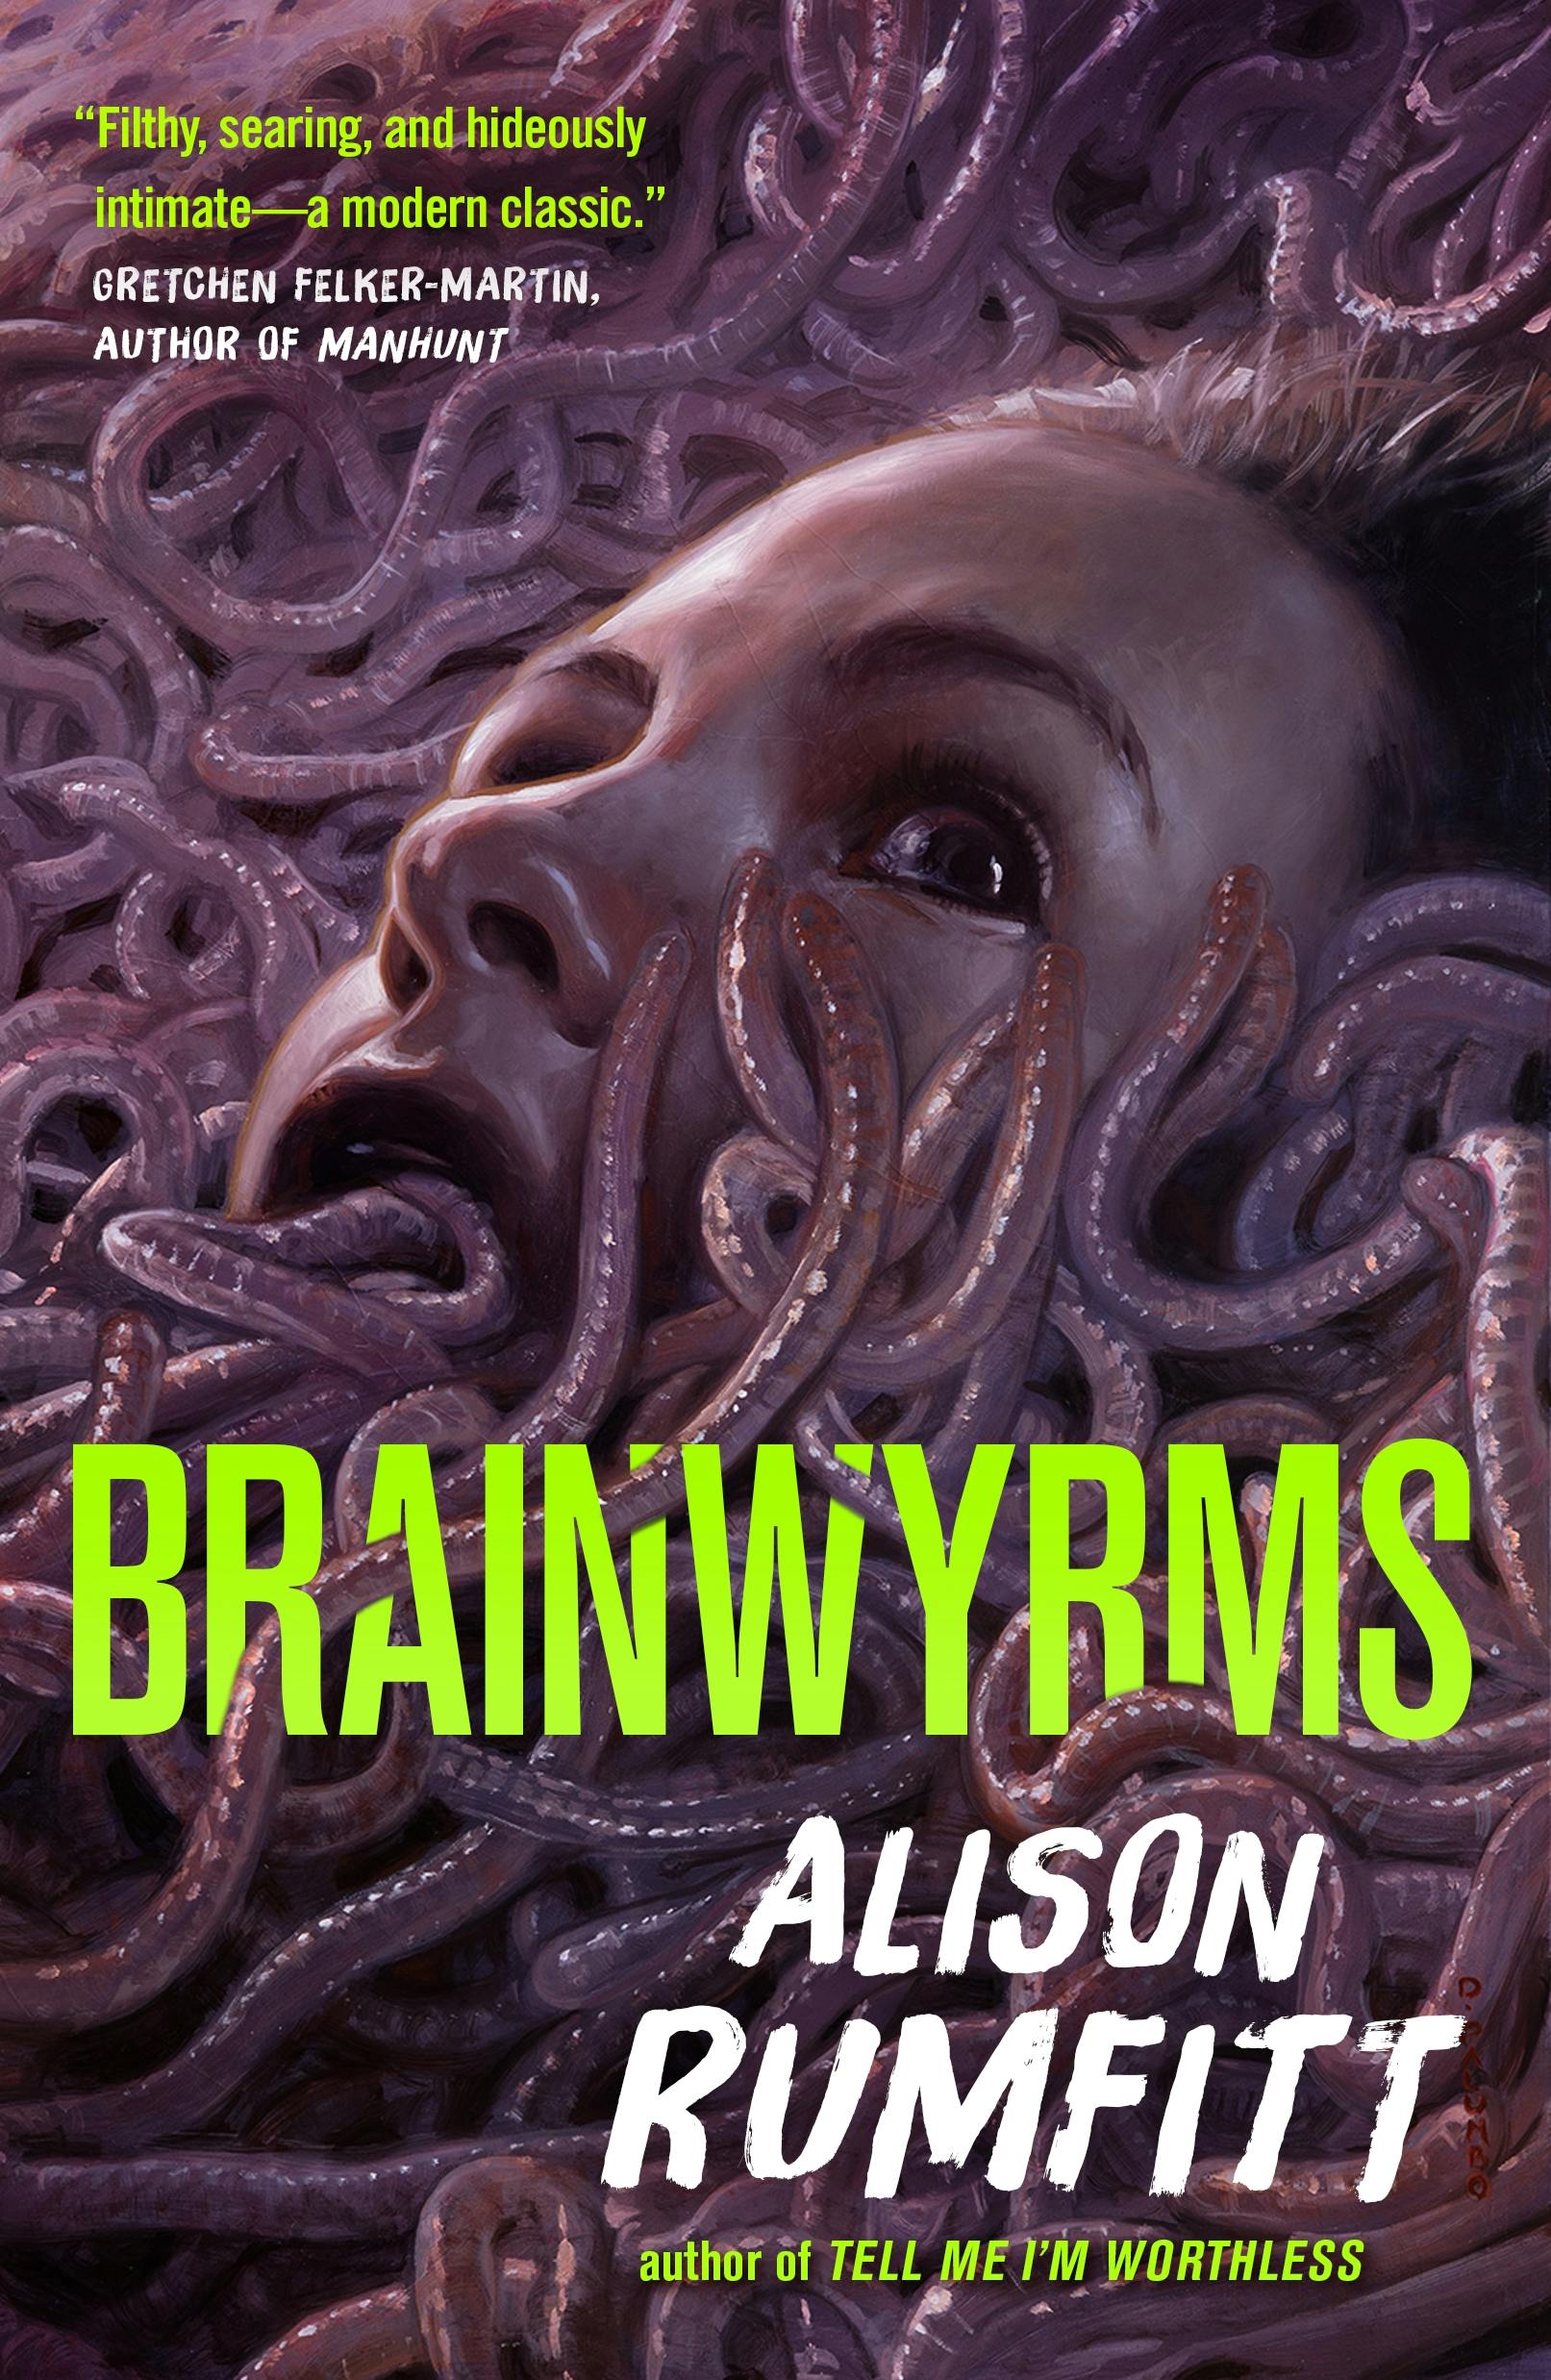 Cover for the book titled as: Brainwyrms